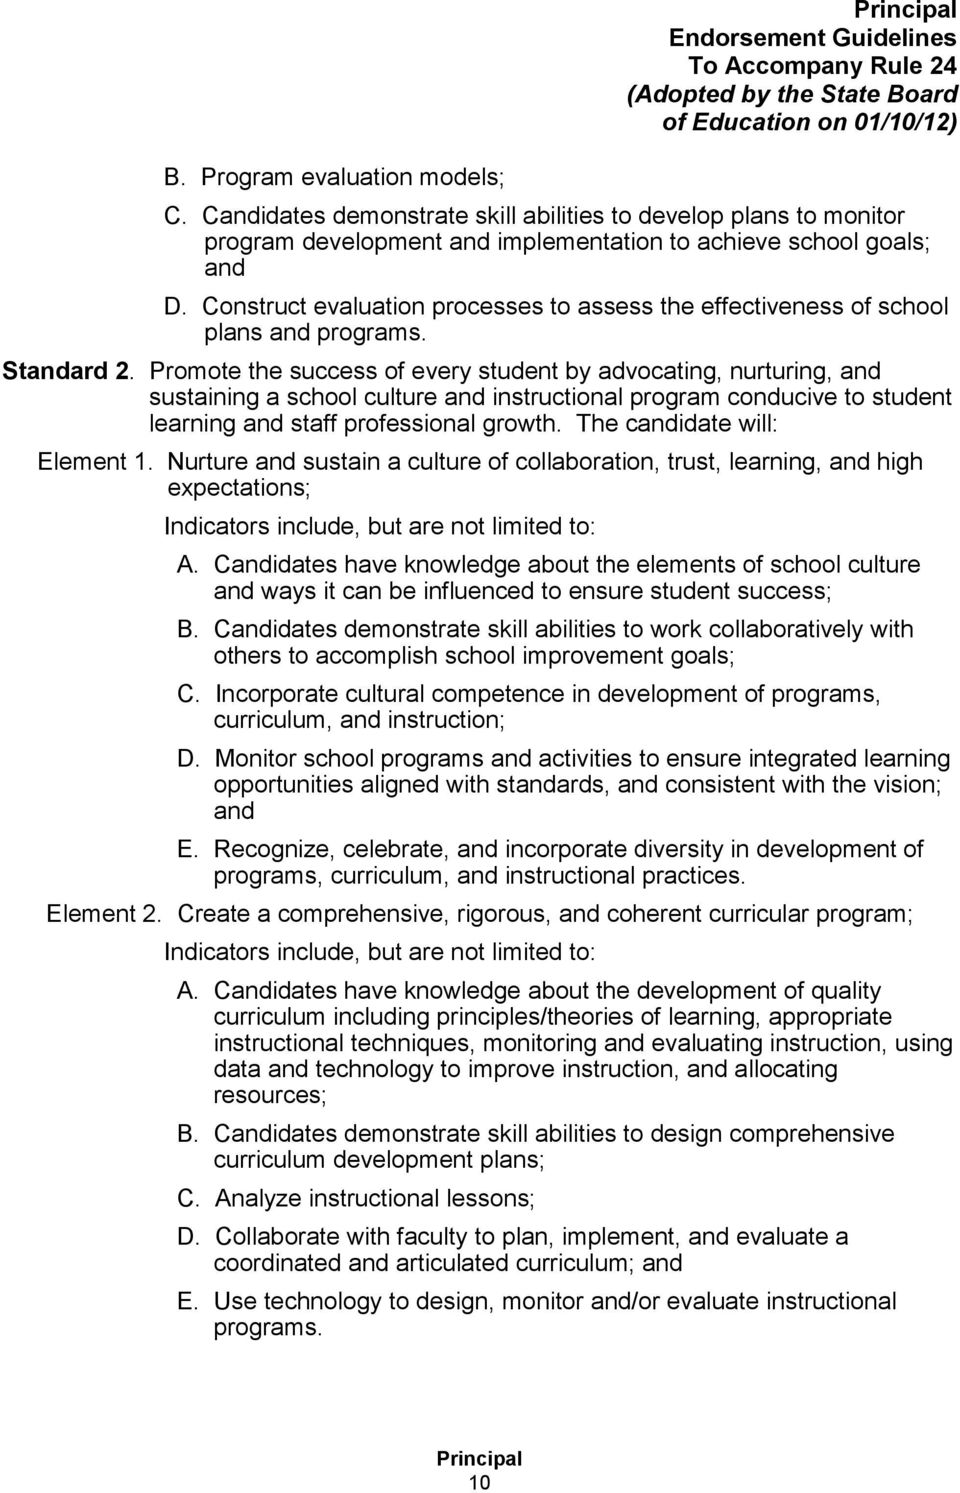 Construct evaluation processes to assess the effectiveness of school plans and programs. Standard 2.